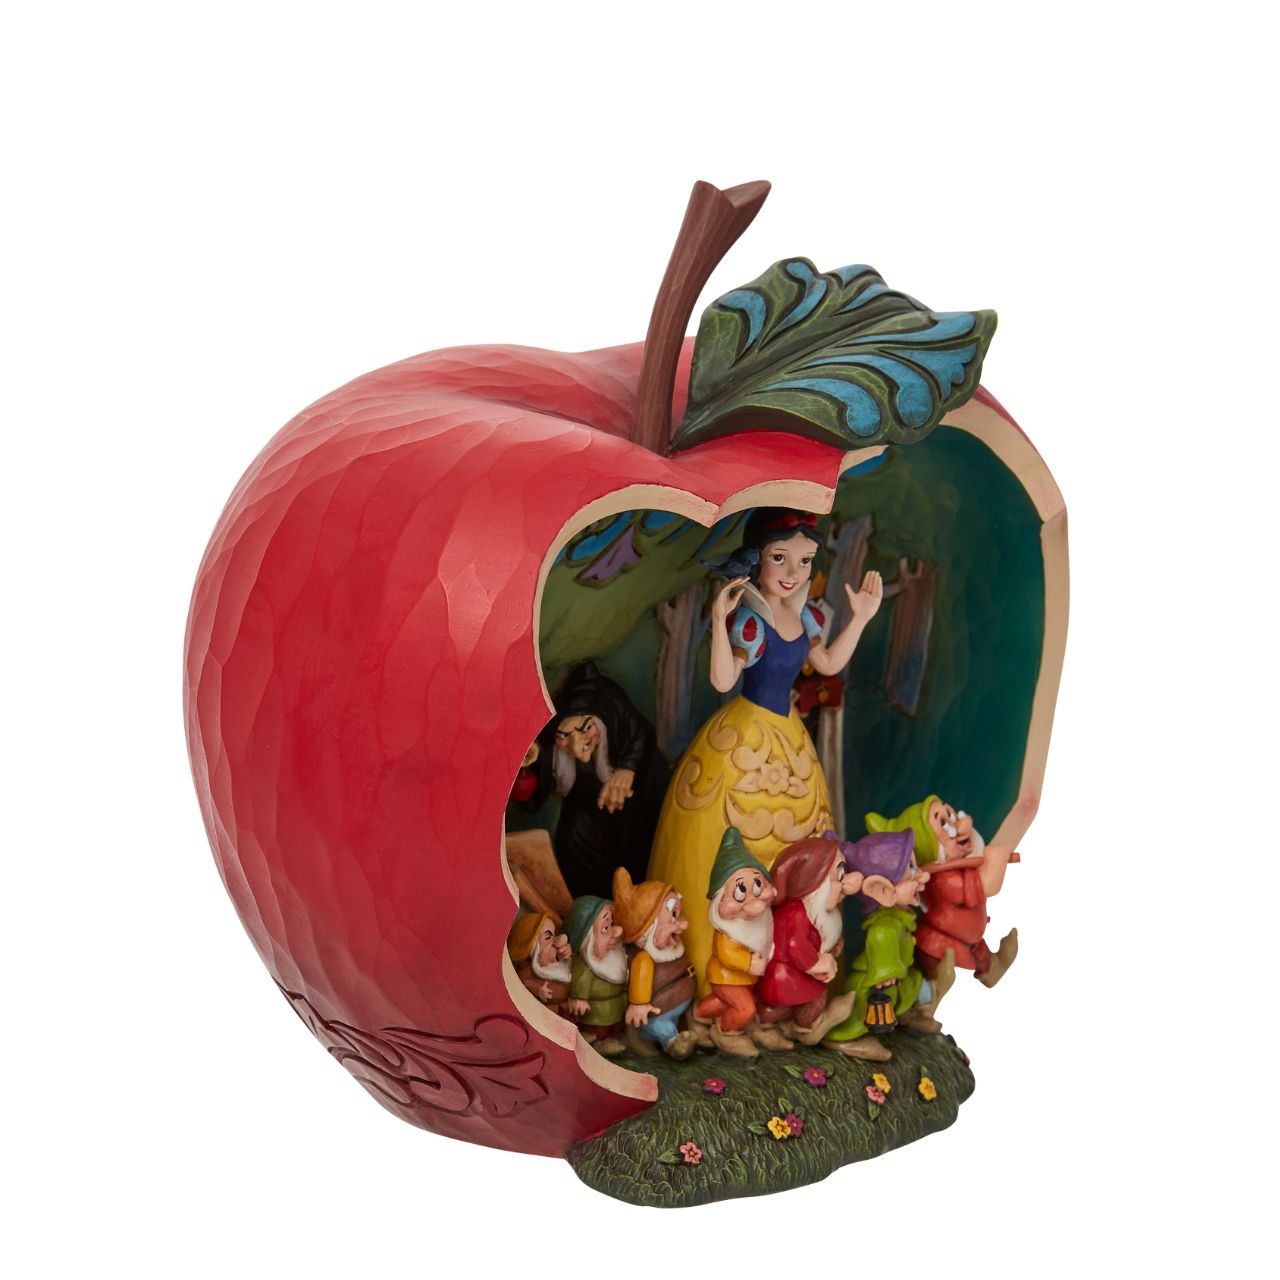 Framed within a halved apple, this bewitching forest scene gathers all the characters of the 1937 Disney classic, Snow White. Snow White smiles alongside the seven dwarfs unaware of the dangers surrounding her while the Evil Queen plots with poison in this spectacular masterpiece.